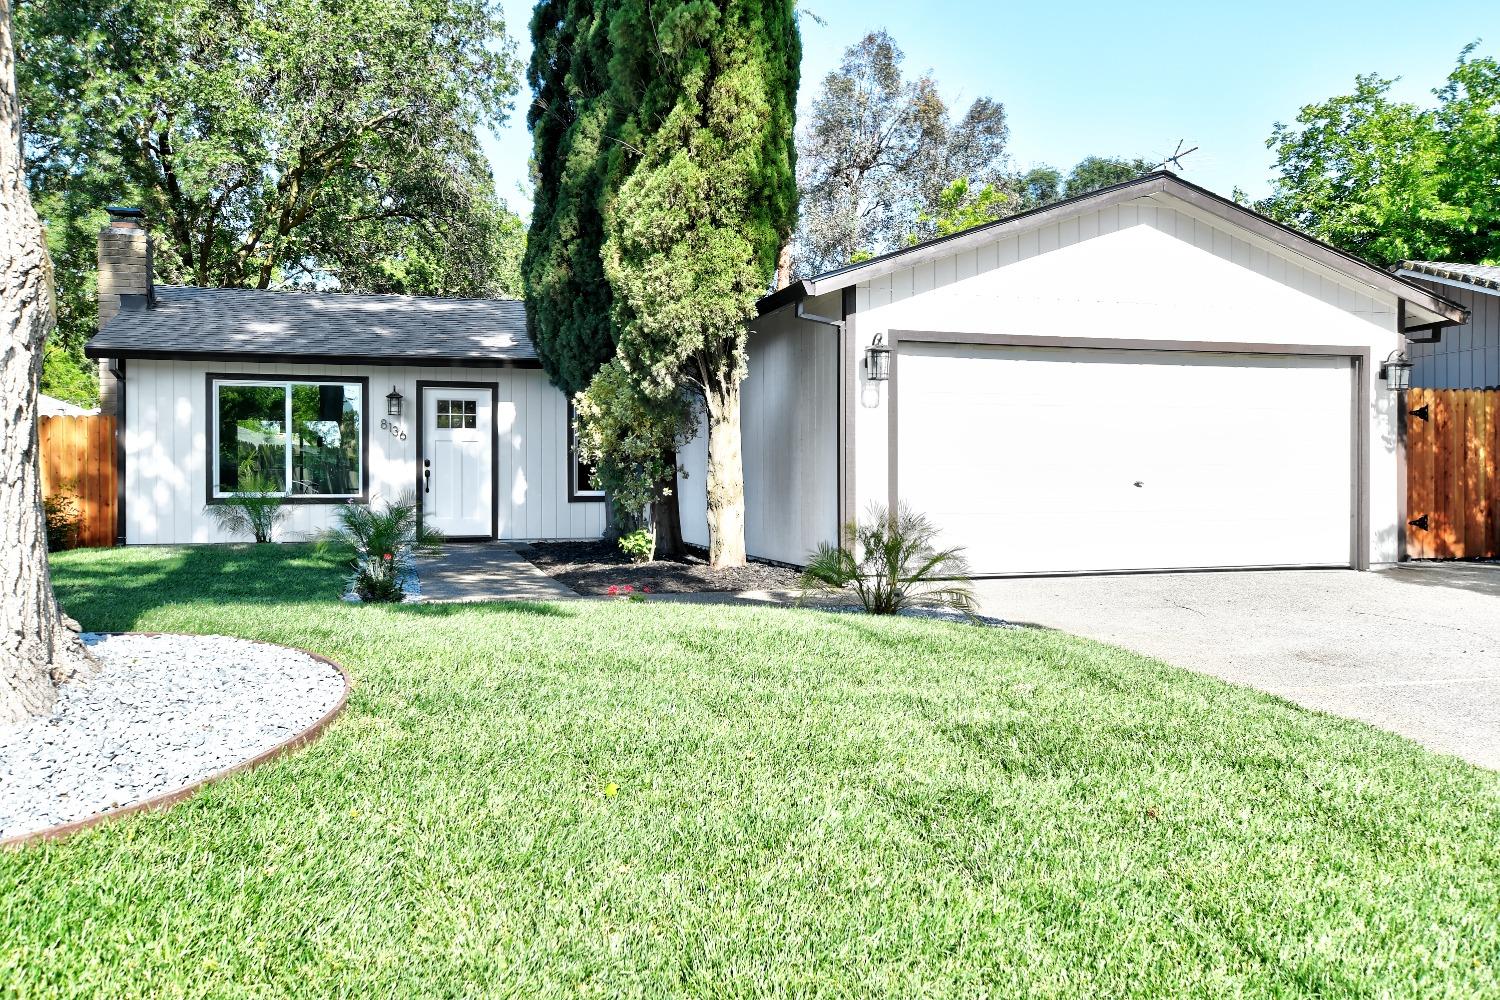 Recently RENOVATED, single-story, 3 bed, 2 bath home in Citrus Heights. Perfect for first time homeb